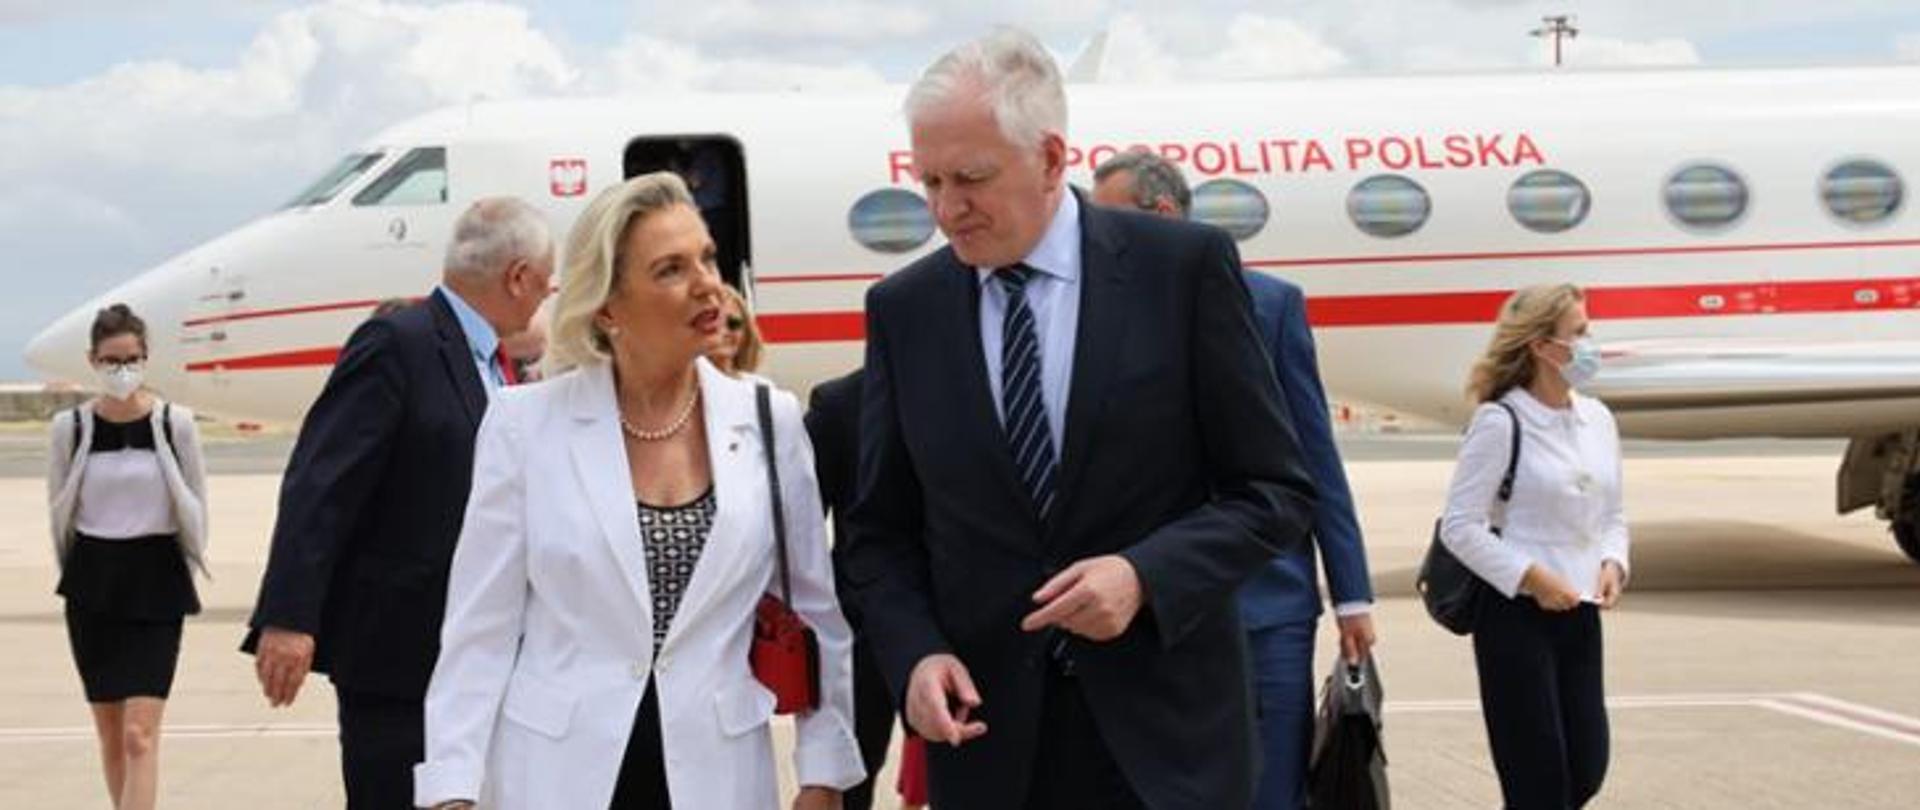 Deputy Prime Minister Jarosław Gowin and the Polish ambassador to Italy Anna Maria Anders at the airport. There is a government plane in the background.